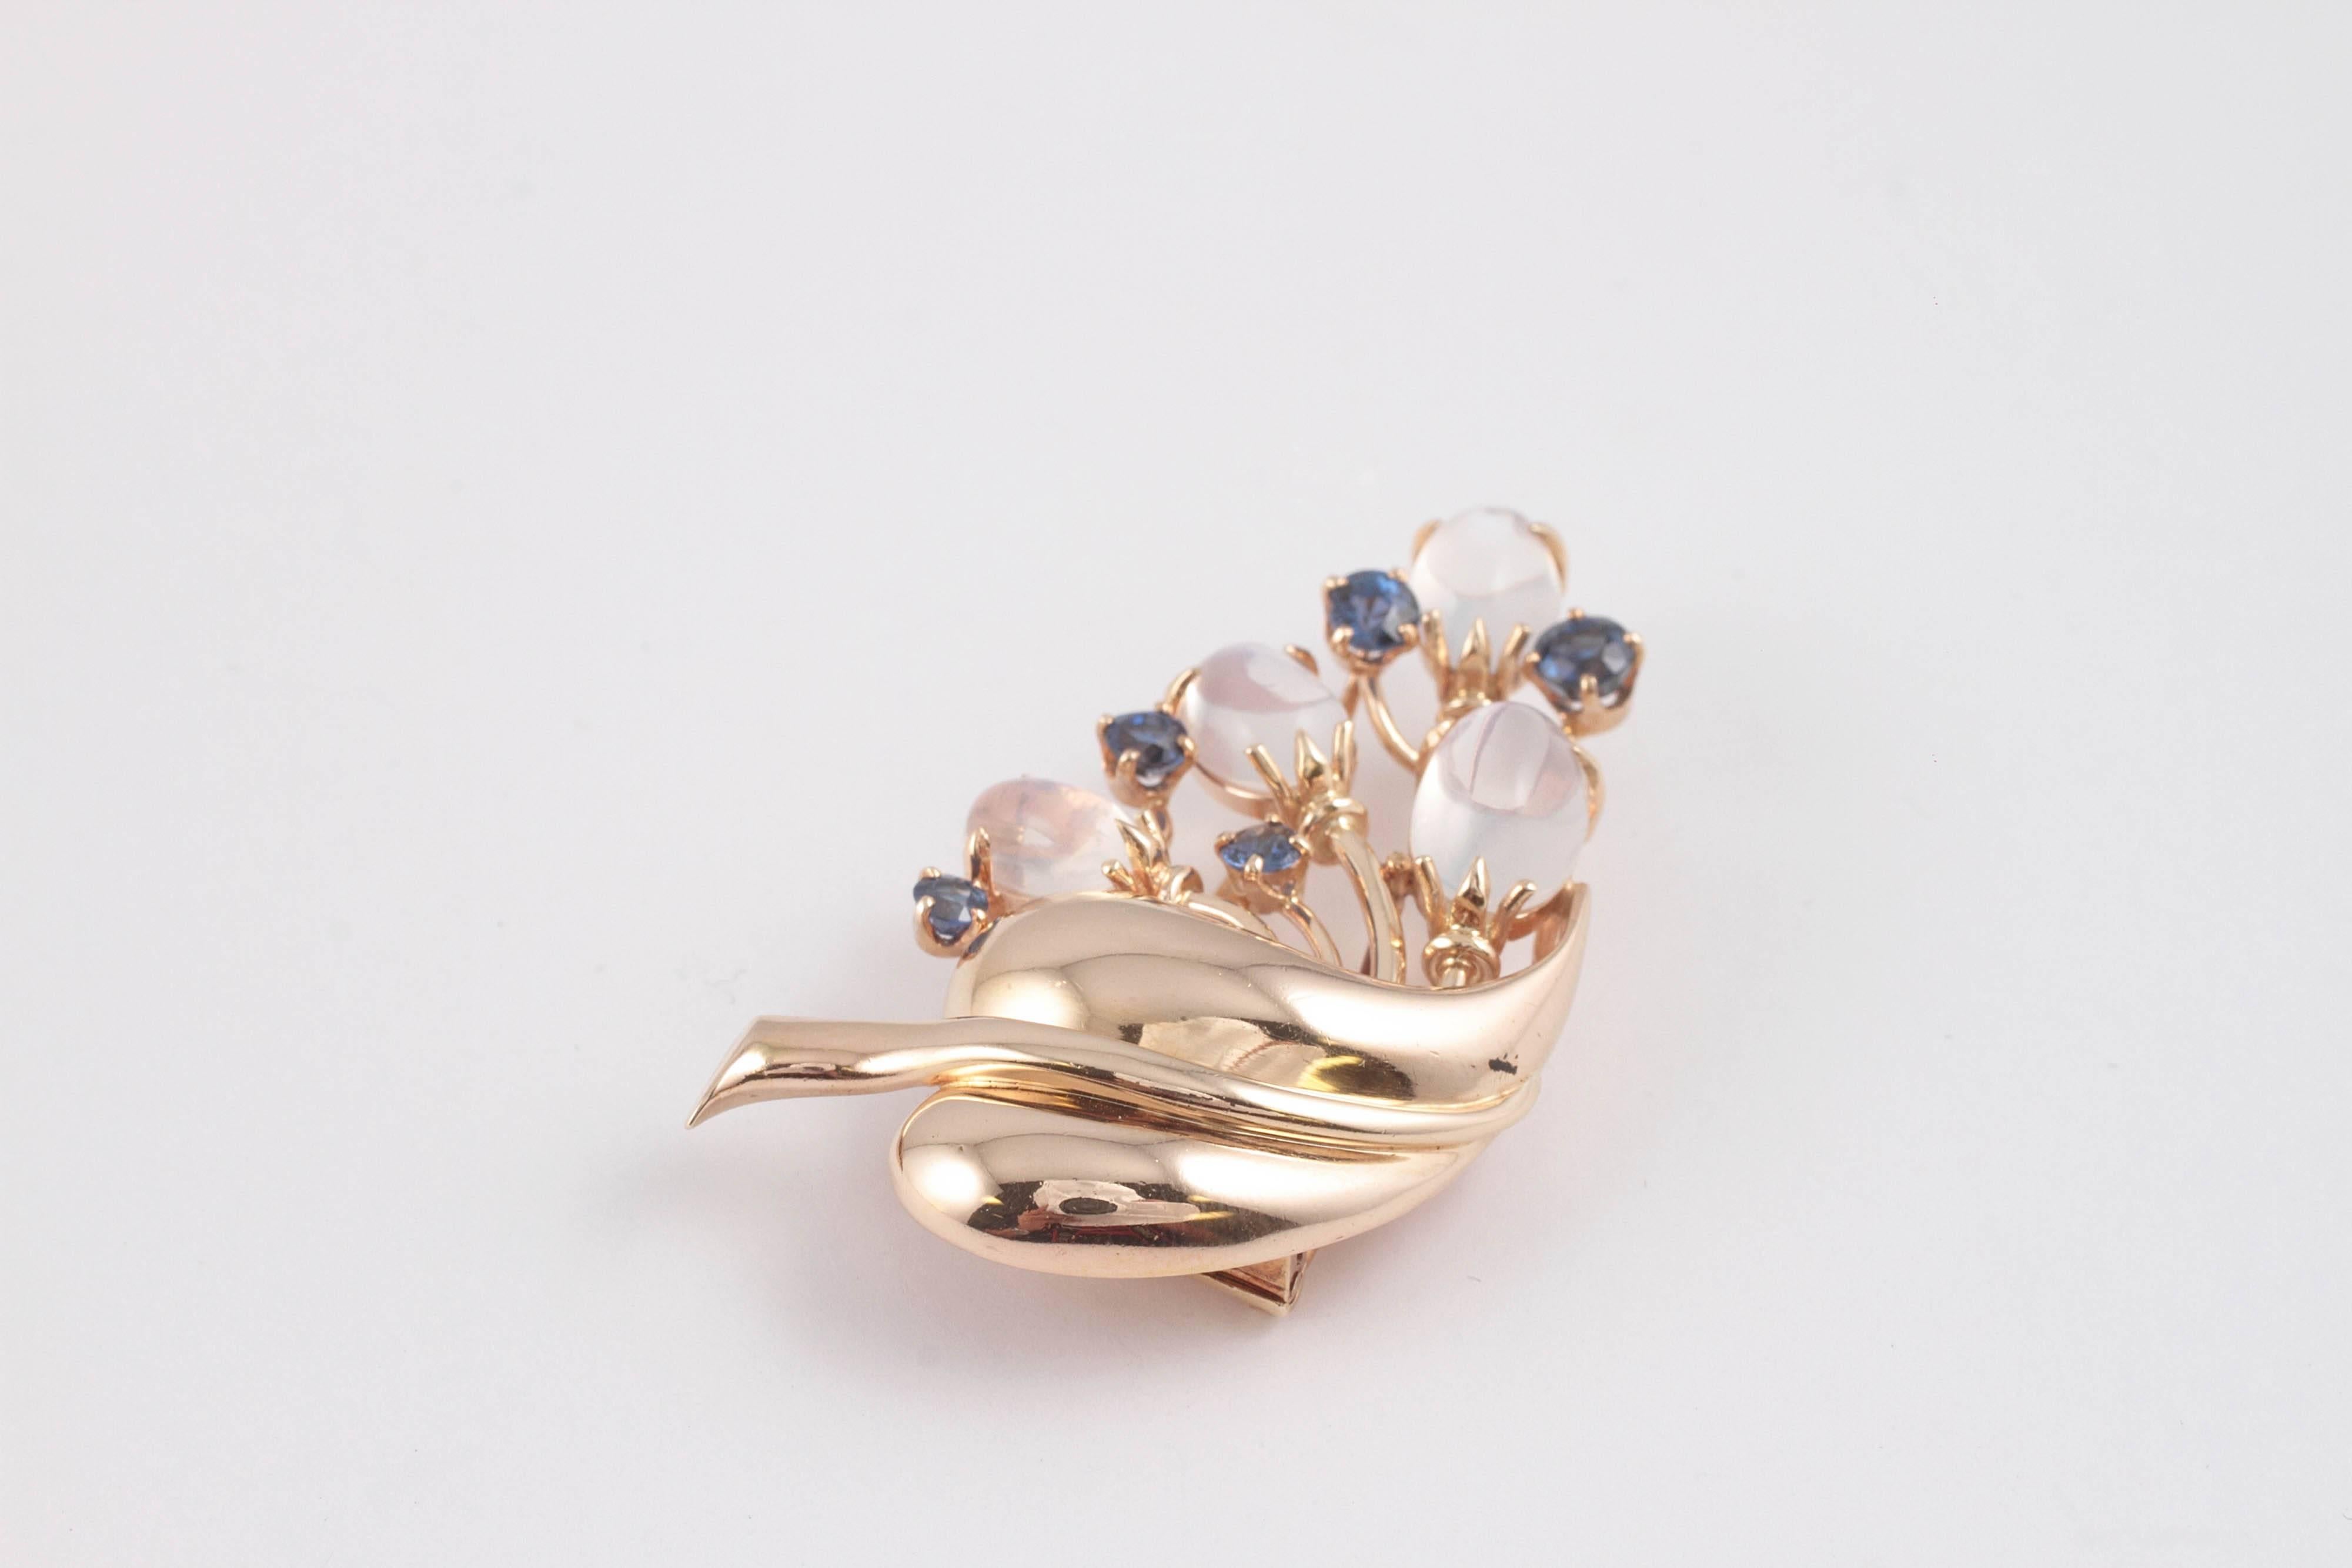 The combination of moonstone and sapphires is striking - complimented by the warm yellow gold!